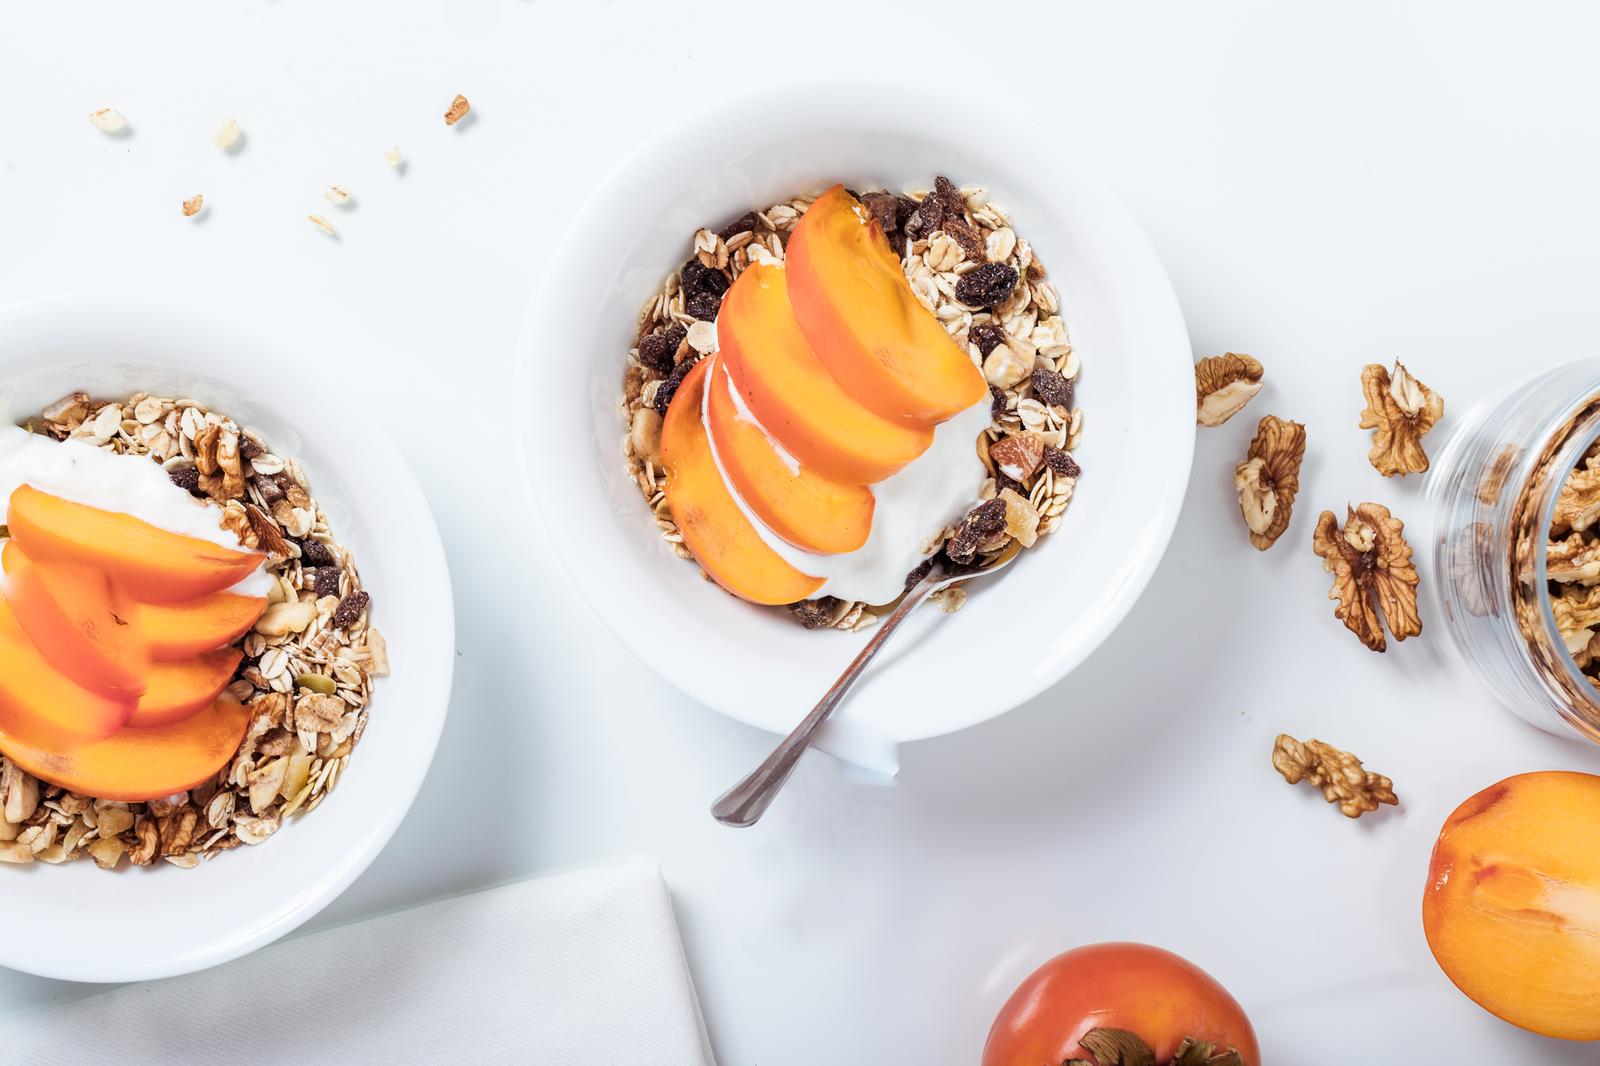 Eat Some 🍰 AI Randomly Generated Desserts to Determine If You’re an Introvert or Extrovert 😃 Peach yogurt parfait